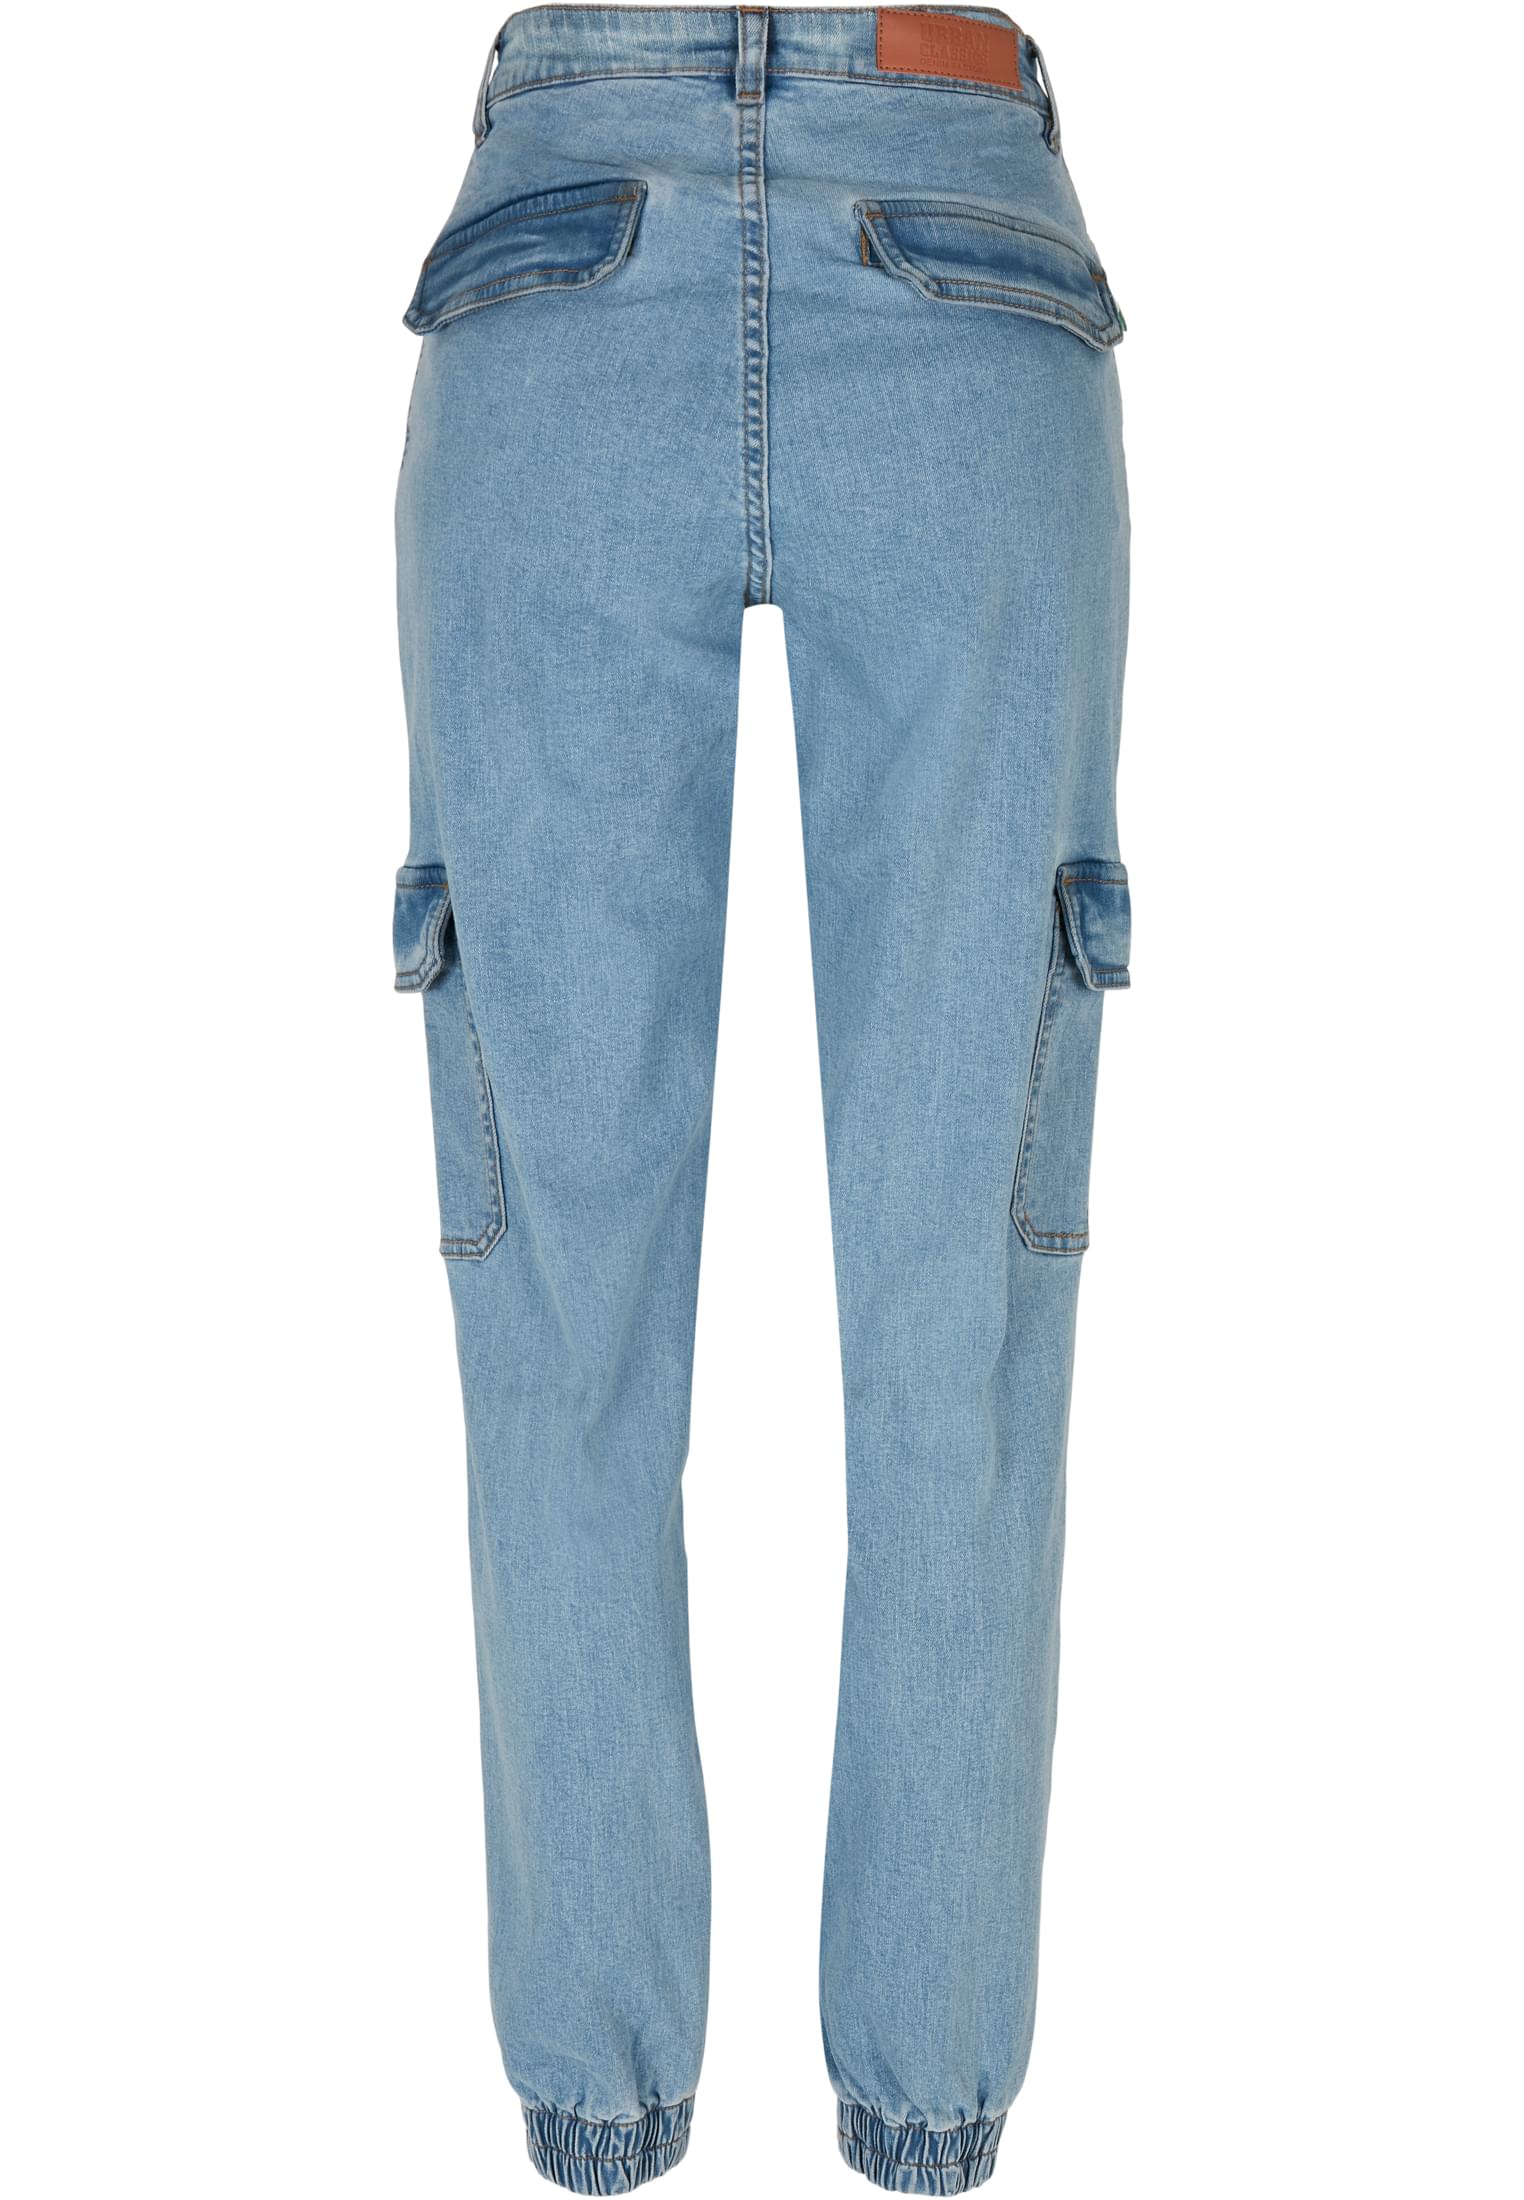 Frauen Ladies Organic Stretch Denim Cargo Pants in Farbe clearblue bleached